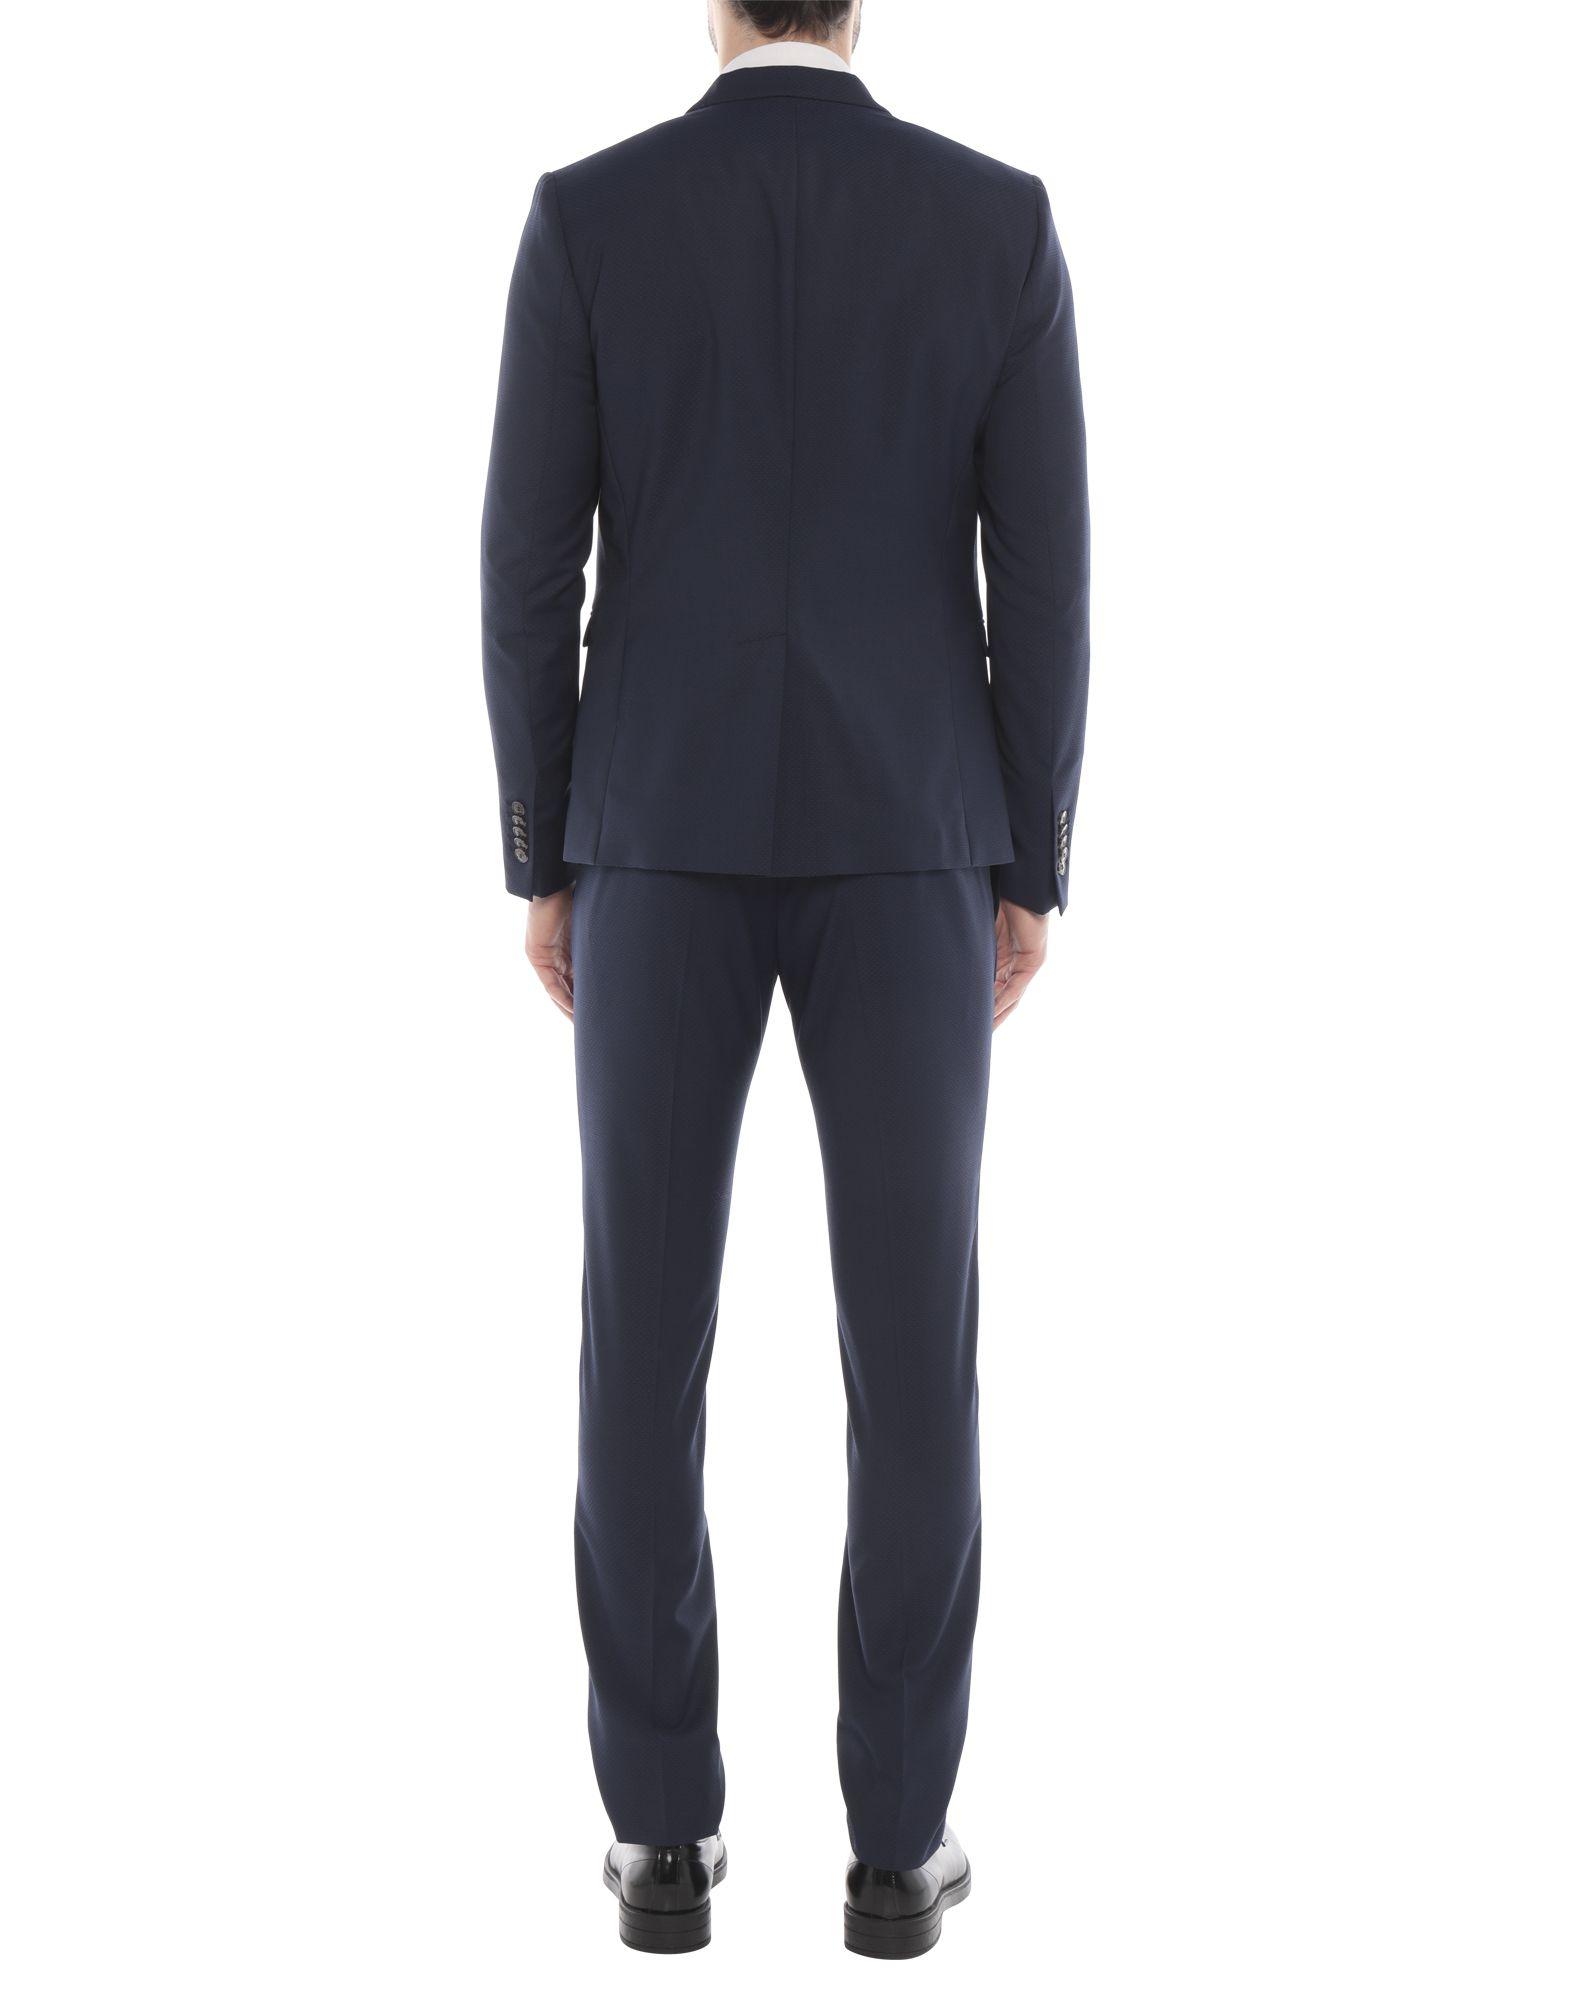 Patrizia Pepe Synthetic Suit in Dark Blue (Blue) for Men - Lyst